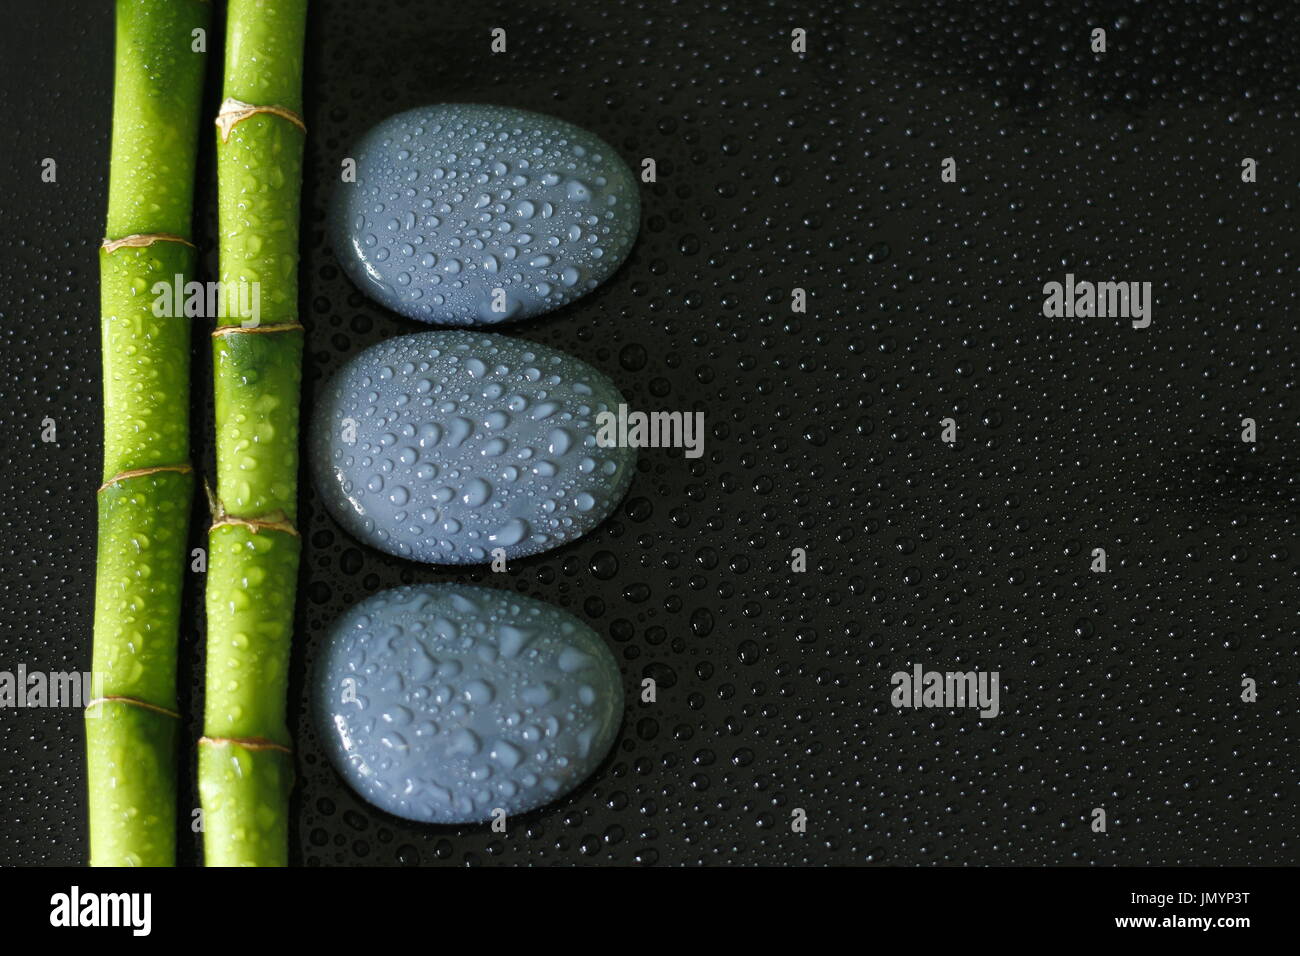 Black background with bamboo branch on the left and gray zen pebbles with drops of water Stock Photo